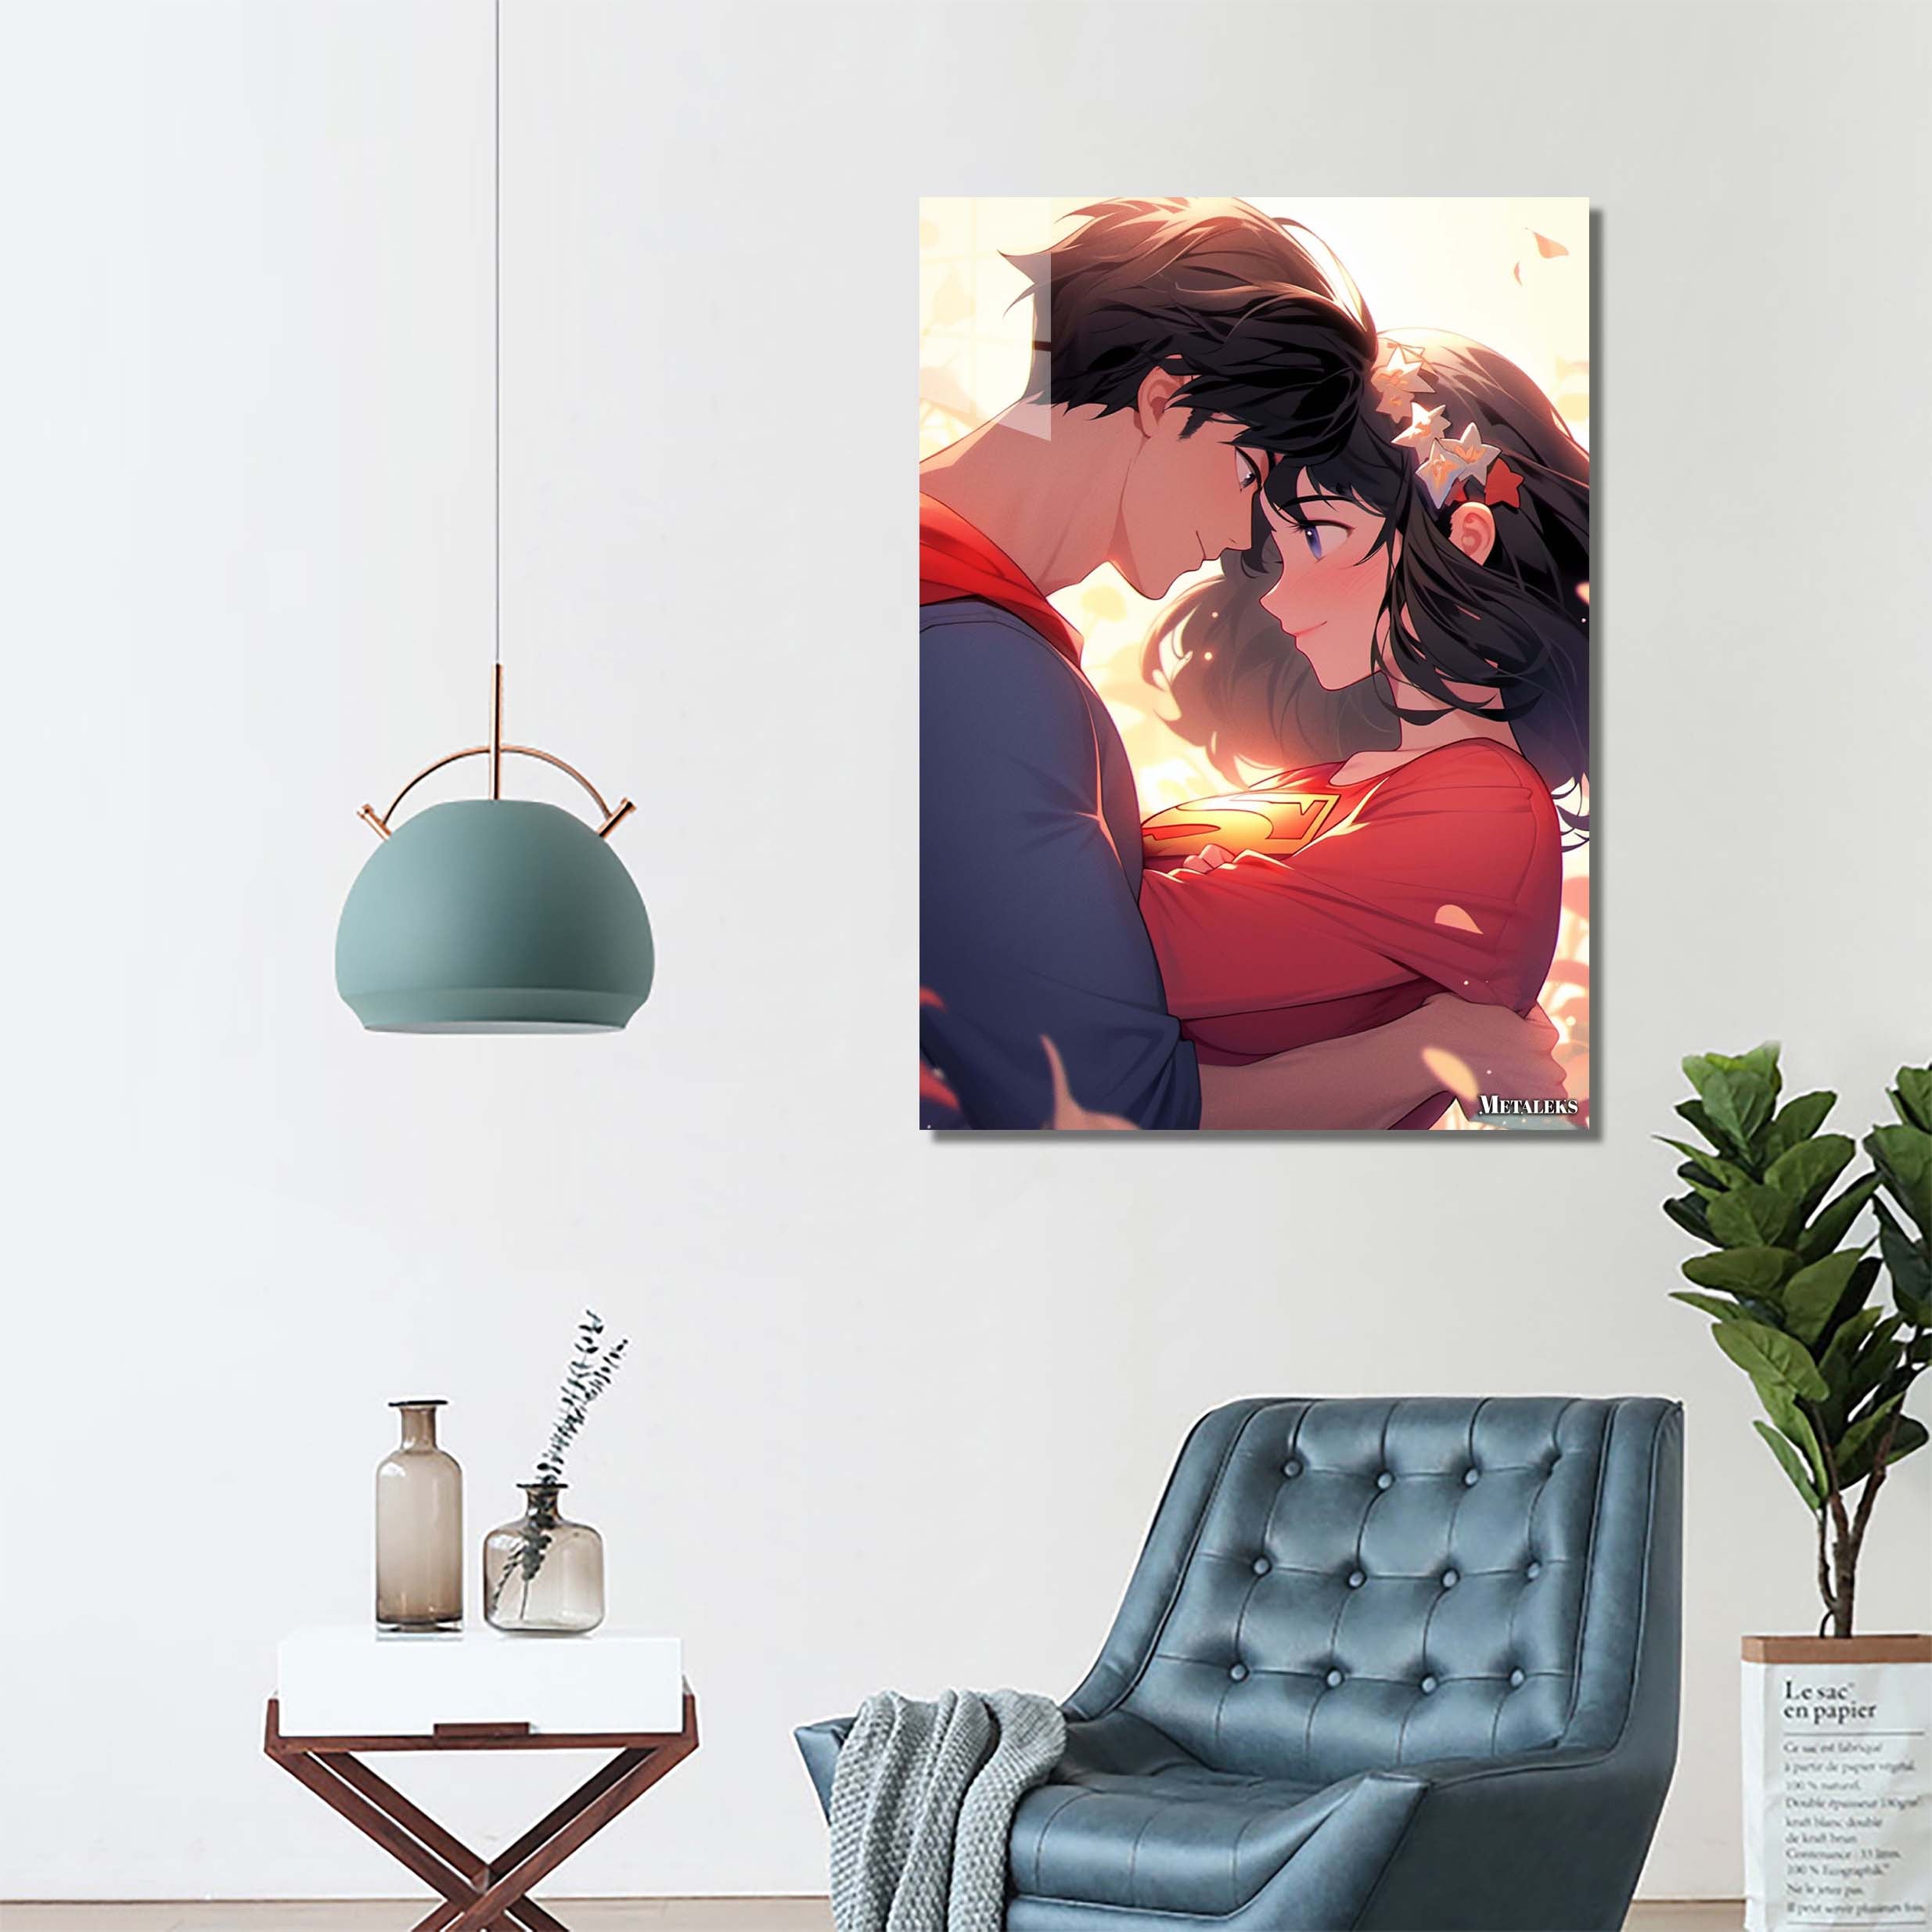 Clark and Lois_ A Love Story Beyond Superpowers-designed by @theanimecrossover